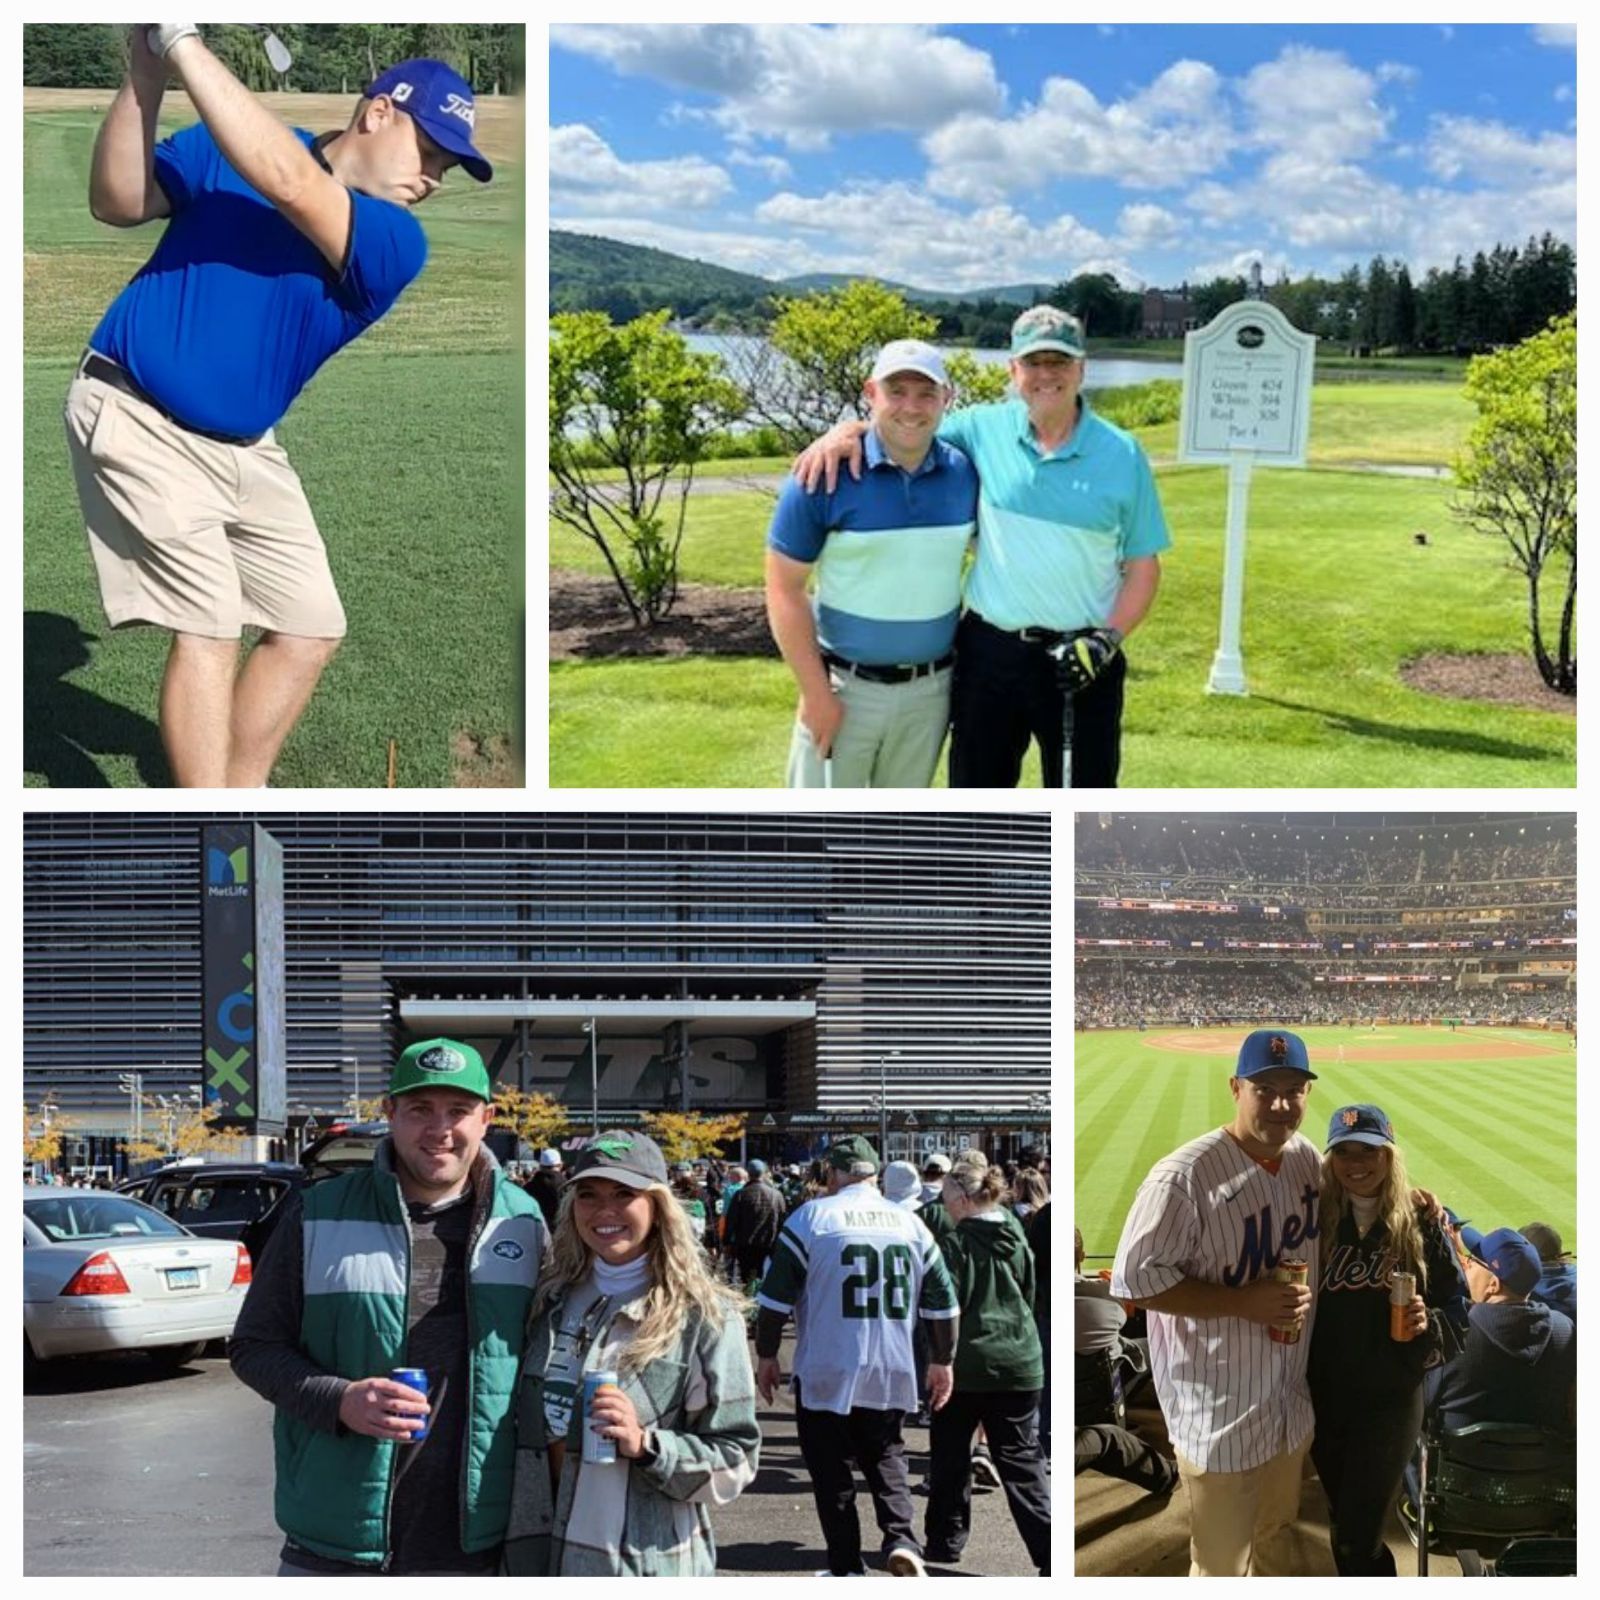 Top left: Rich Christman swings a golf club. Top right: Rich stands with his uncle at a golf course. Bottom left and bottom right: Rich stands with his girlfriend at various sporting events.